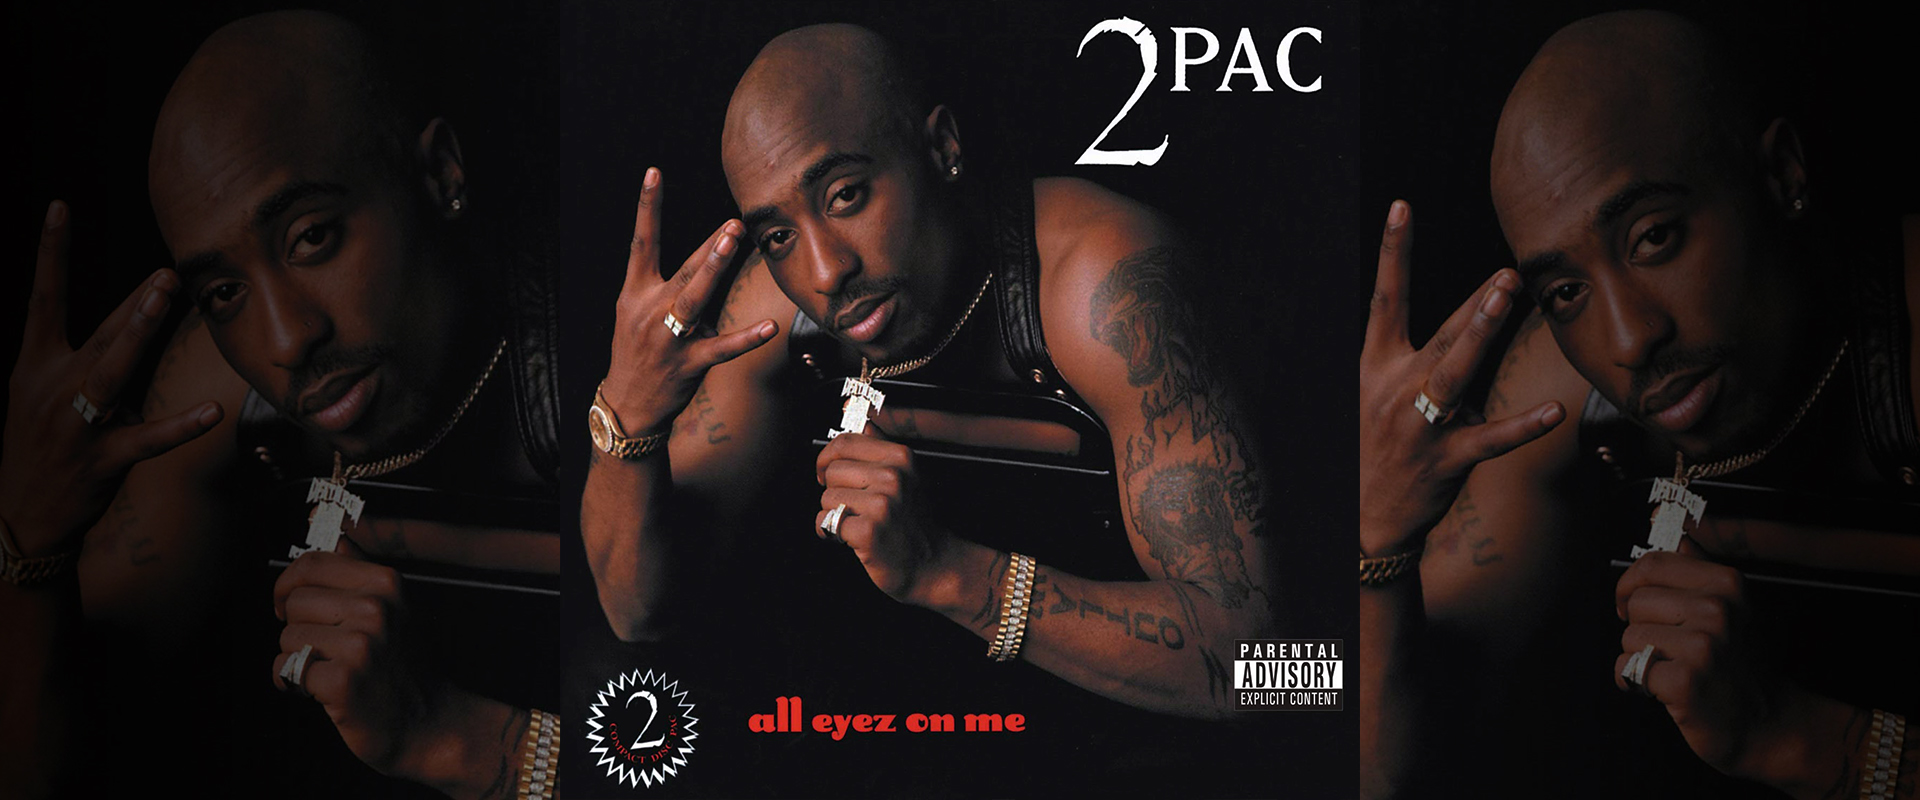 ALL EYEZ ON ME by 2PAC